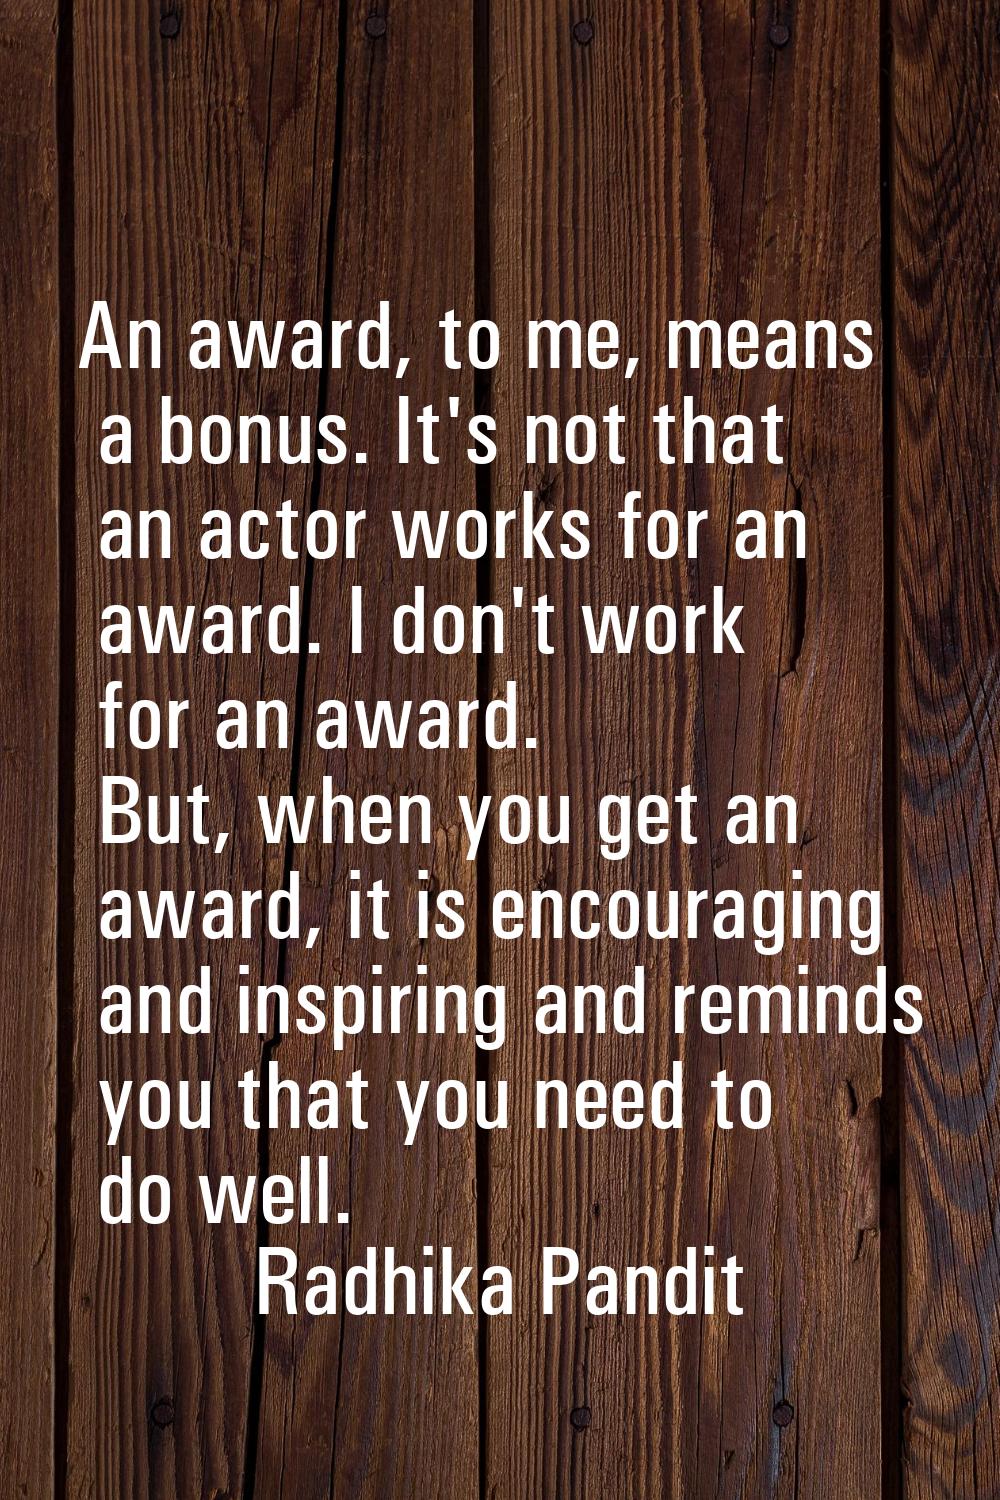 An award, to me, means a bonus. It's not that an actor works for an award. I don't work for an awar